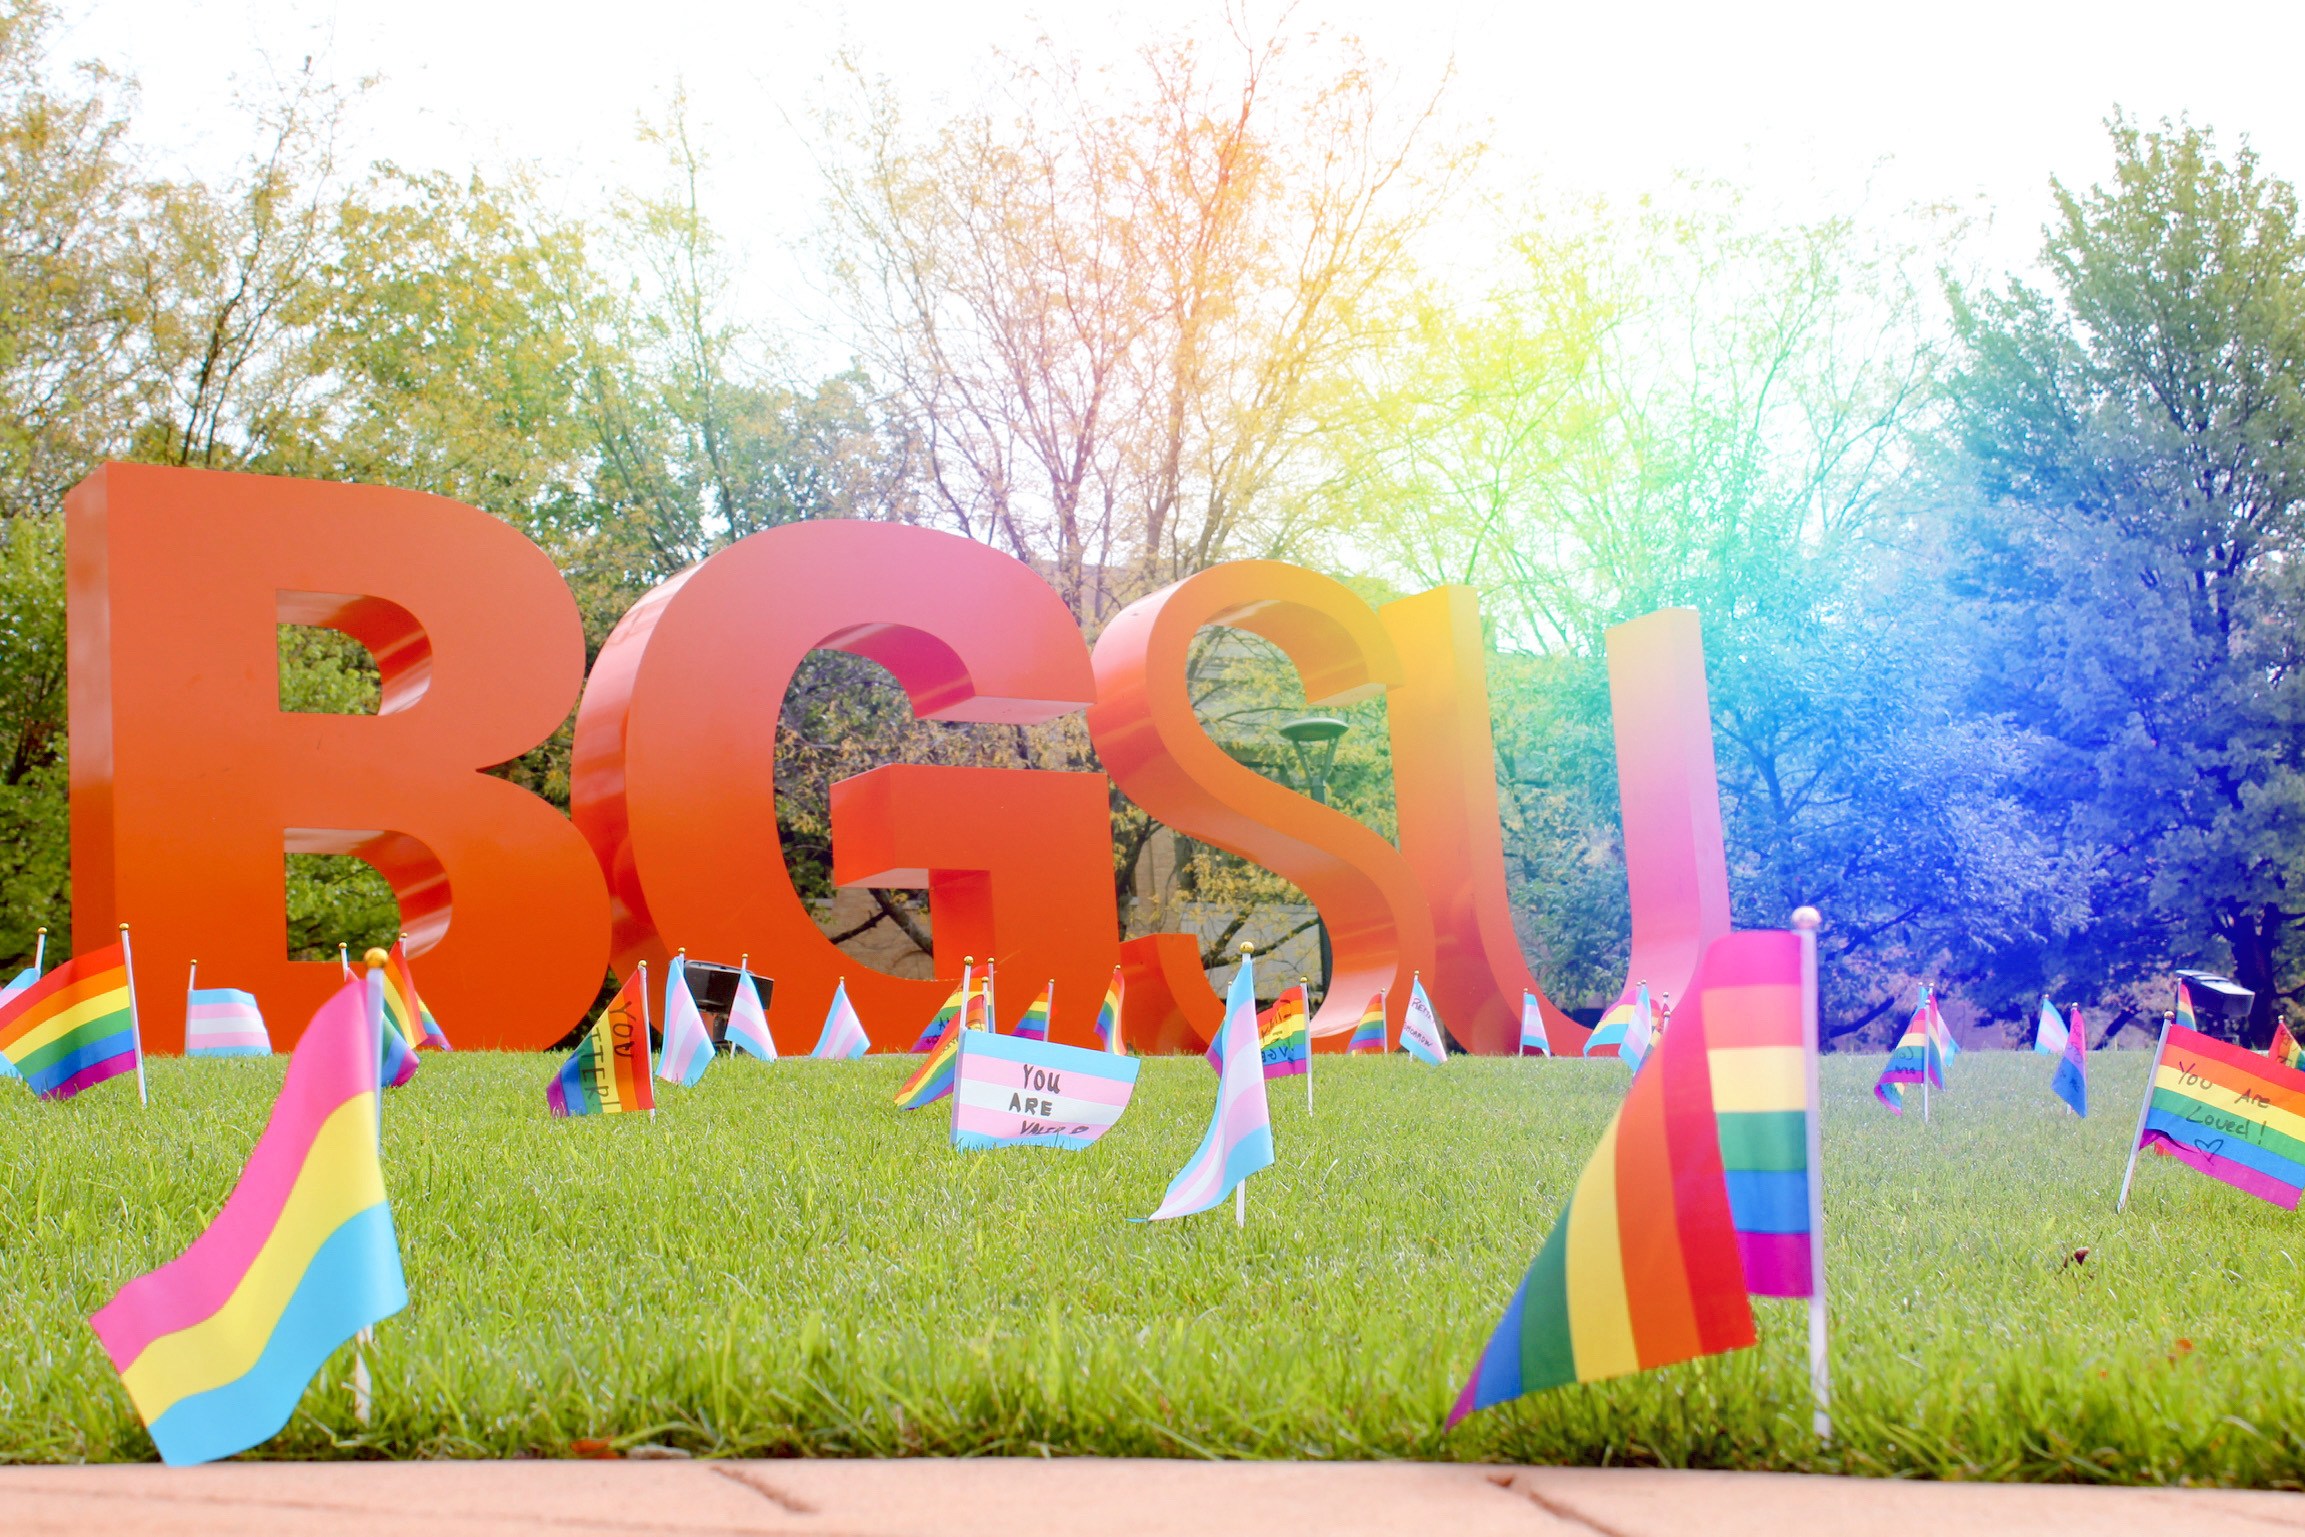 Flags in the lawn in front of BGSU letters in Union Oval